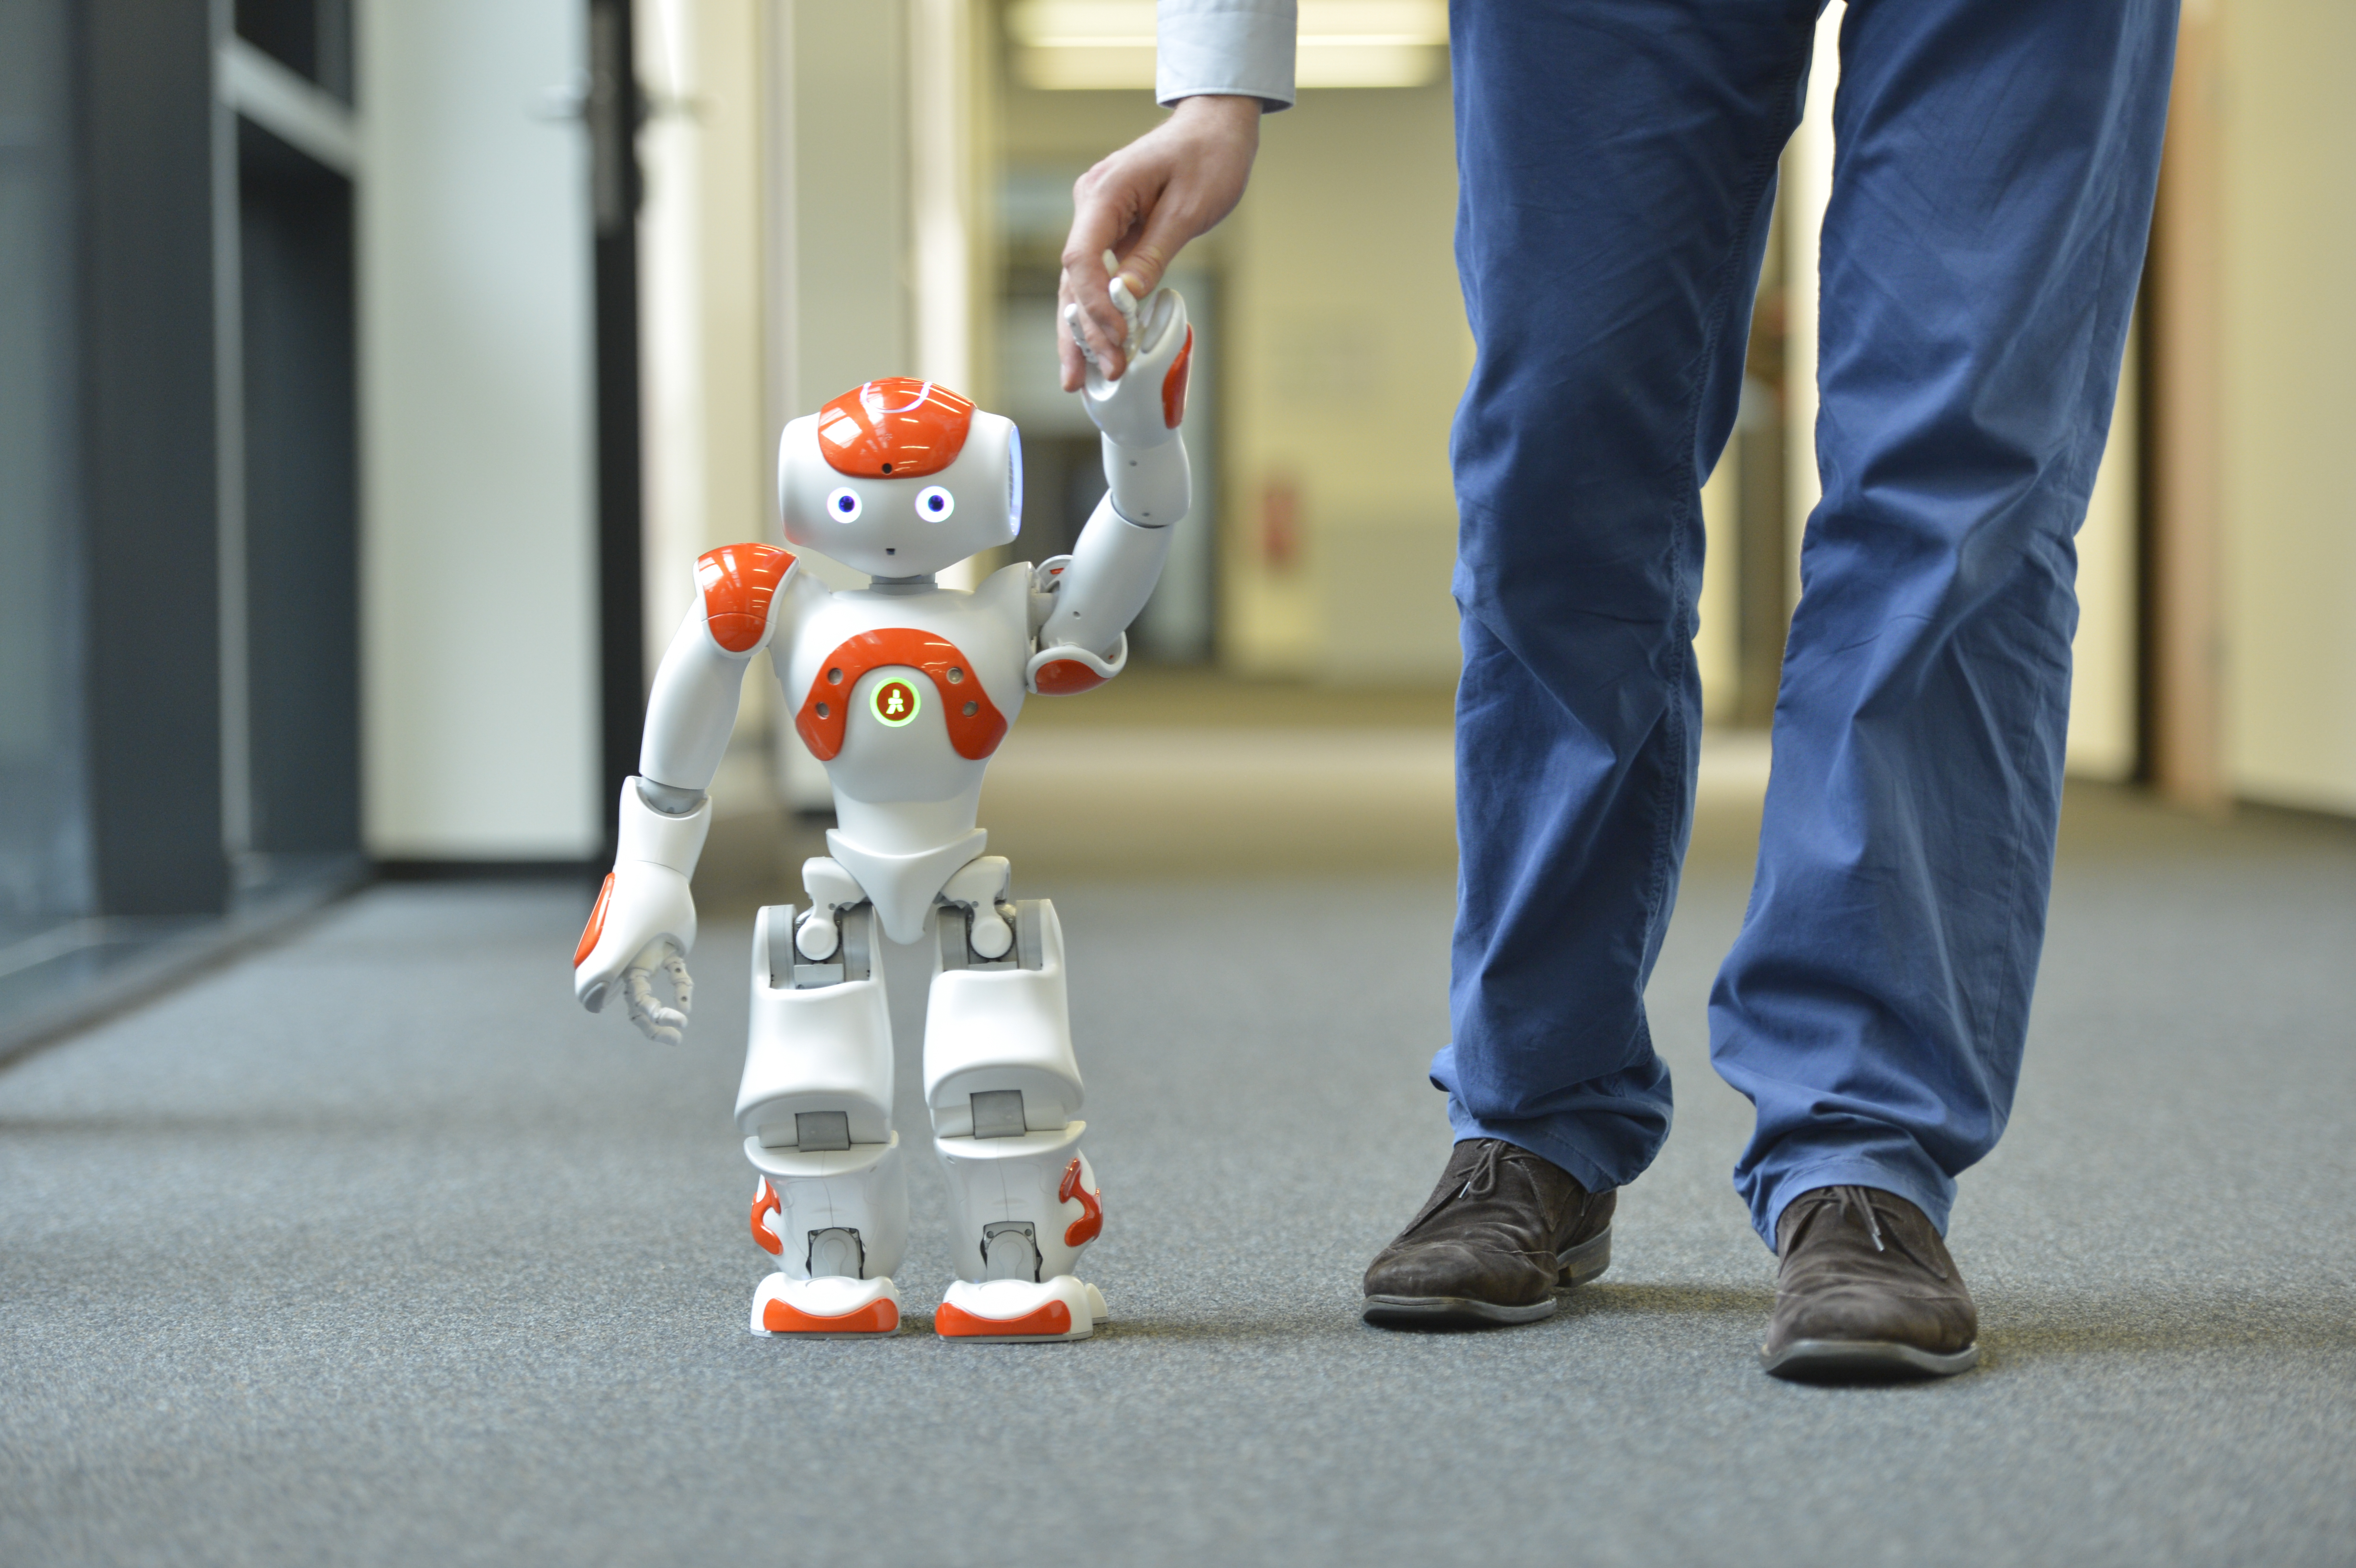 A small humanoid robot holds hands with a human as they walk down an aisle.